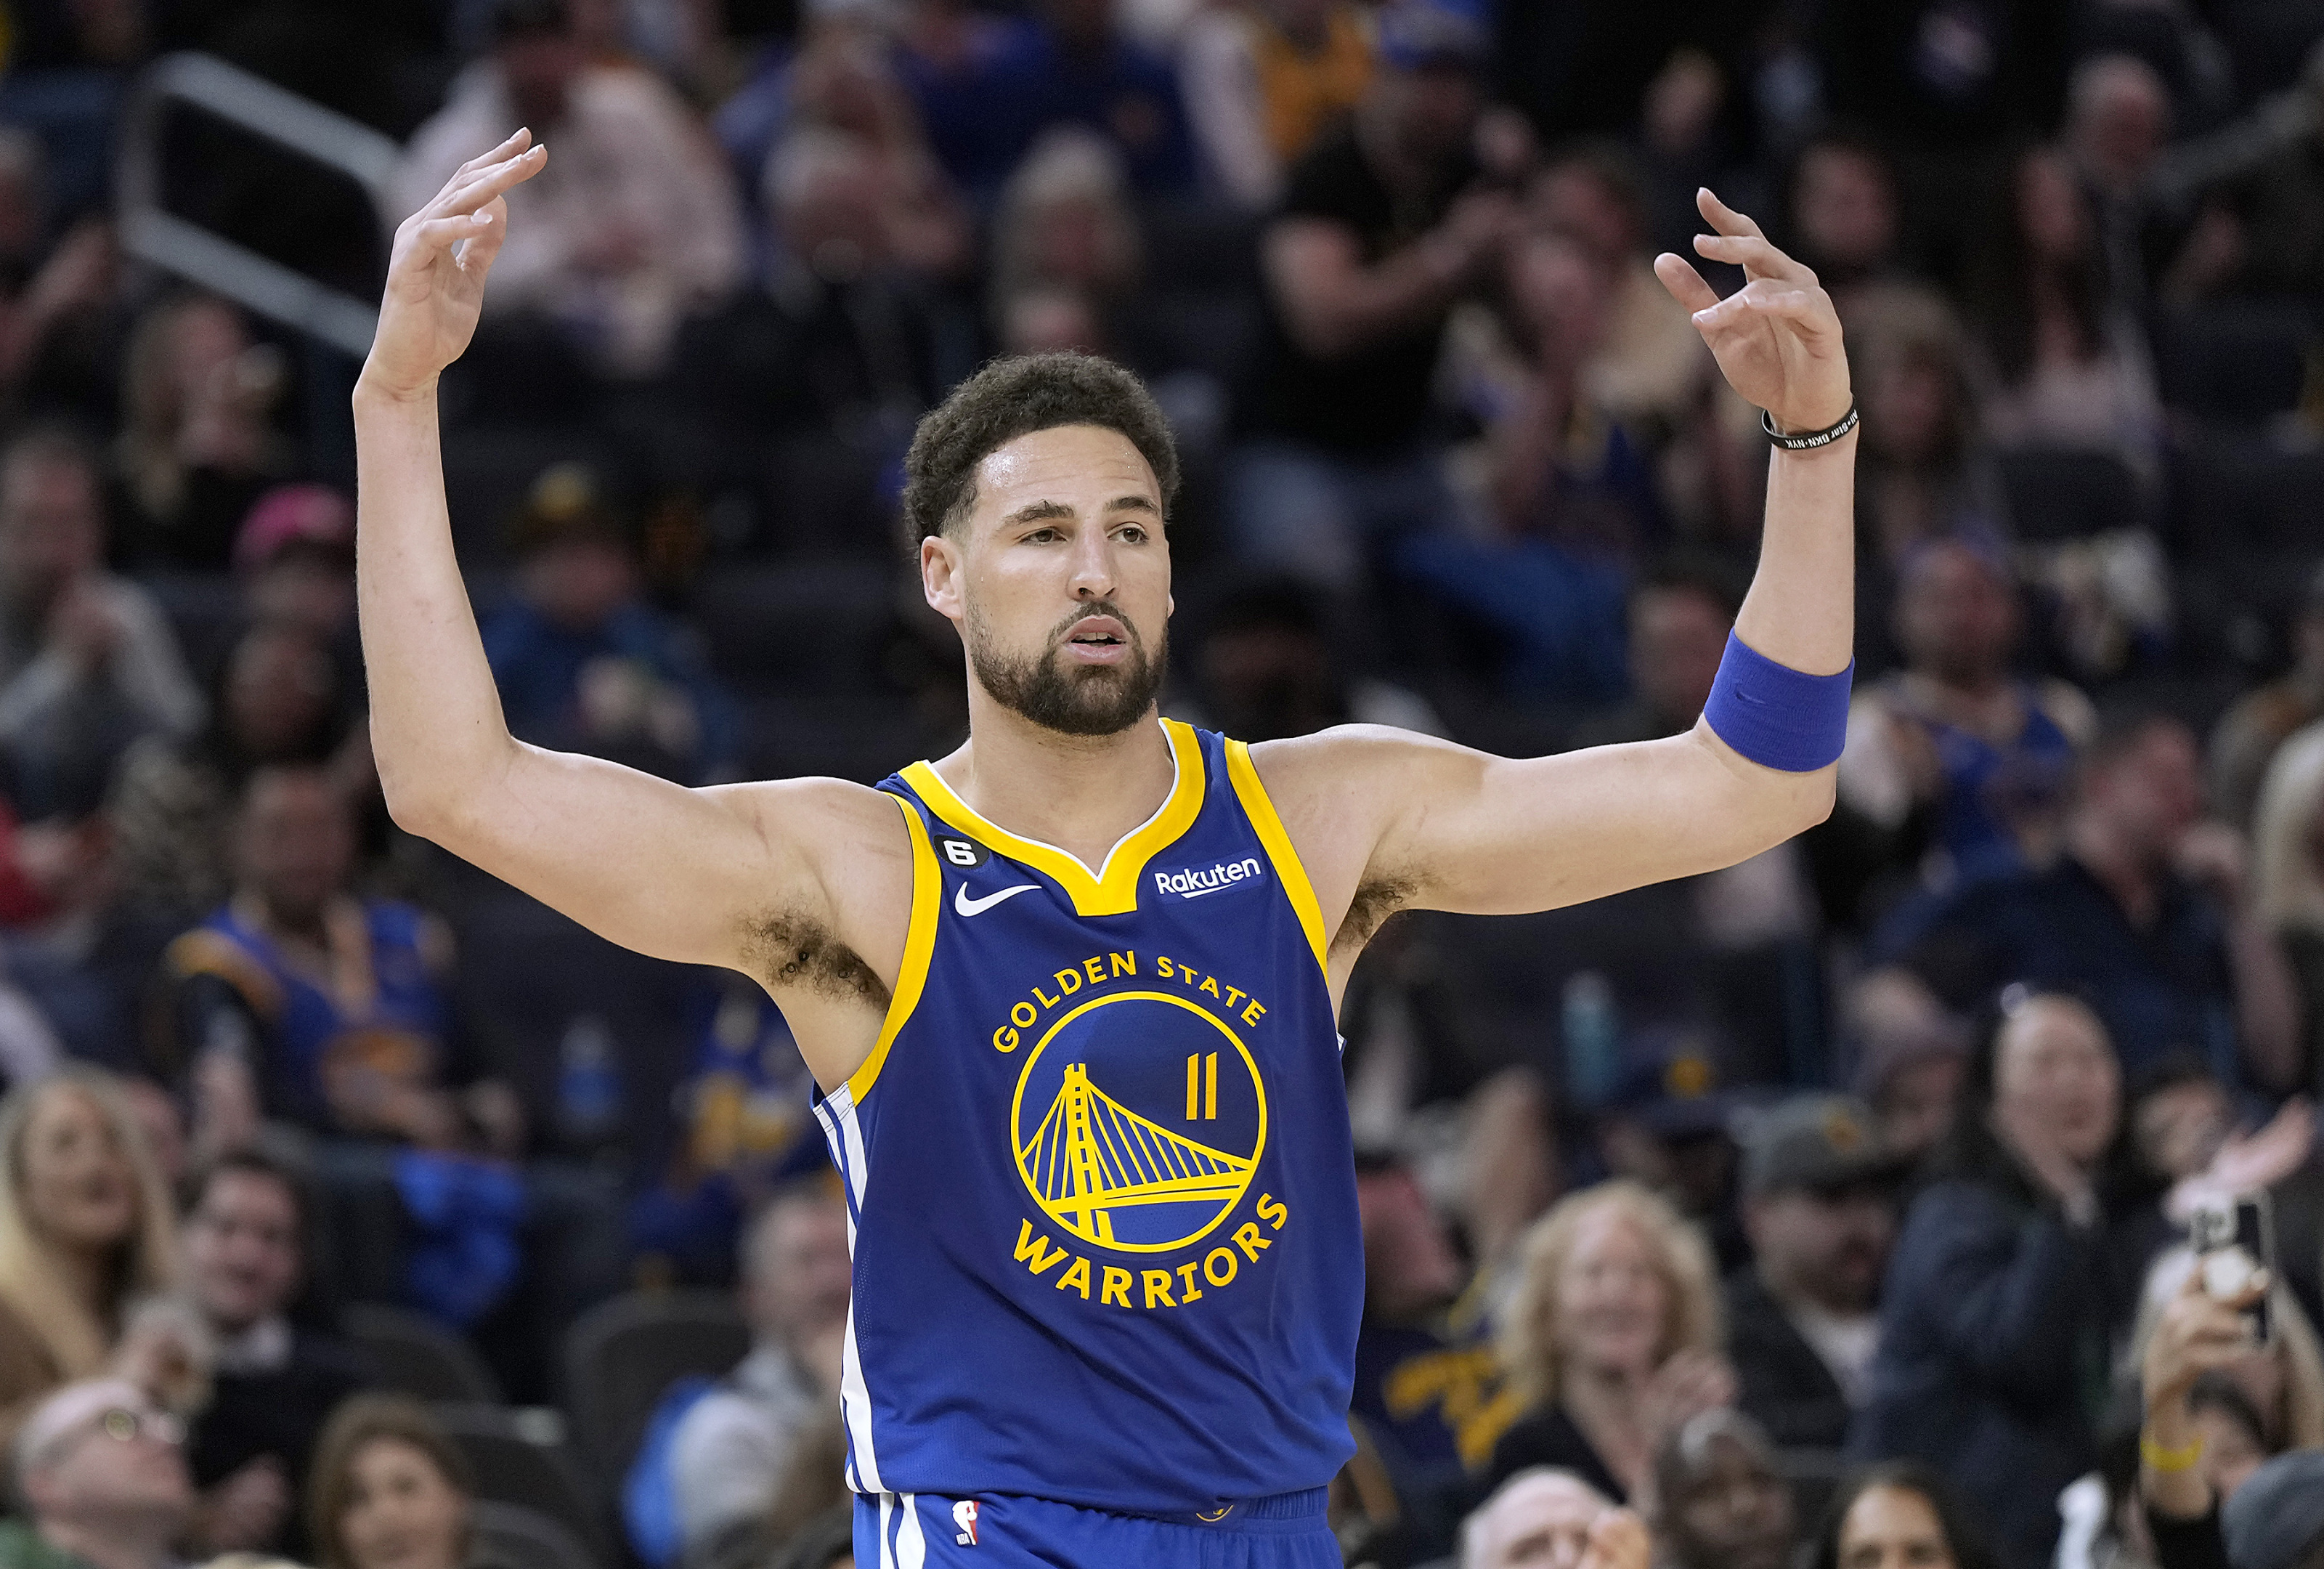 Klay Thompson sets career high in 3-pointers in 1st full season